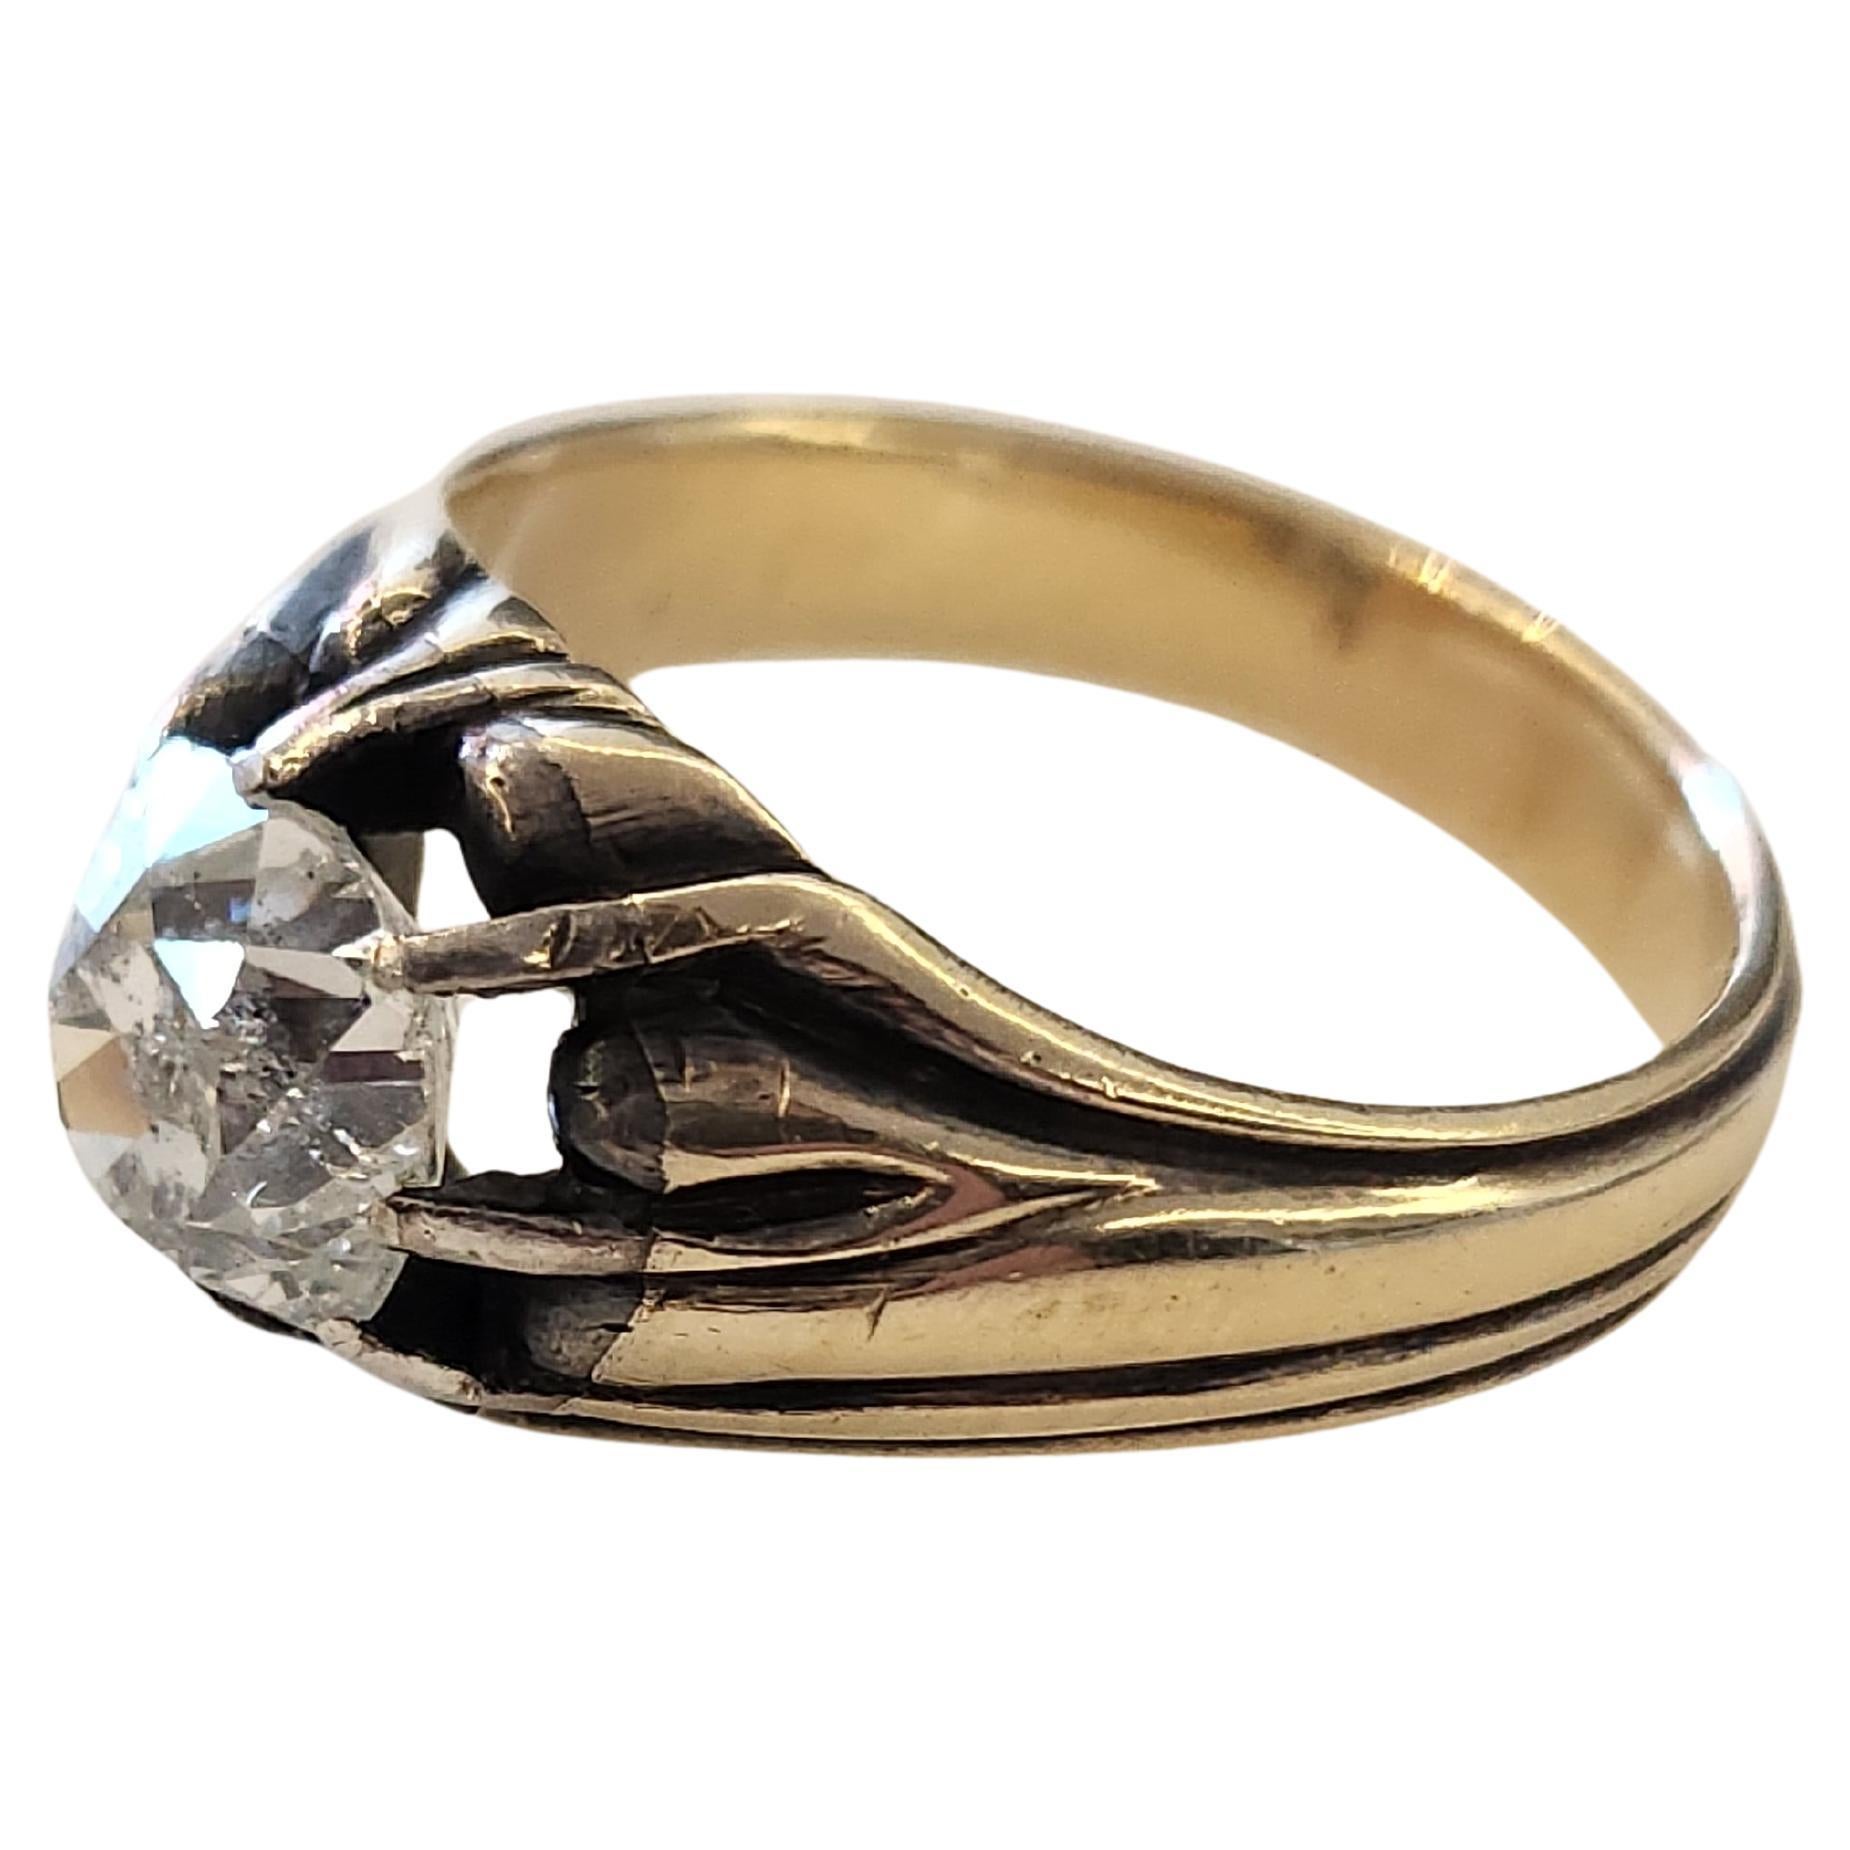 Antique 14k Russian old mine cut diamond ring in solitaire style with detailed artnovo work style centered with 1 old mine cut diamond with an estimate diamond weight of 1.50 carat diameter 7.50mm H color wth several inclusions included that can be